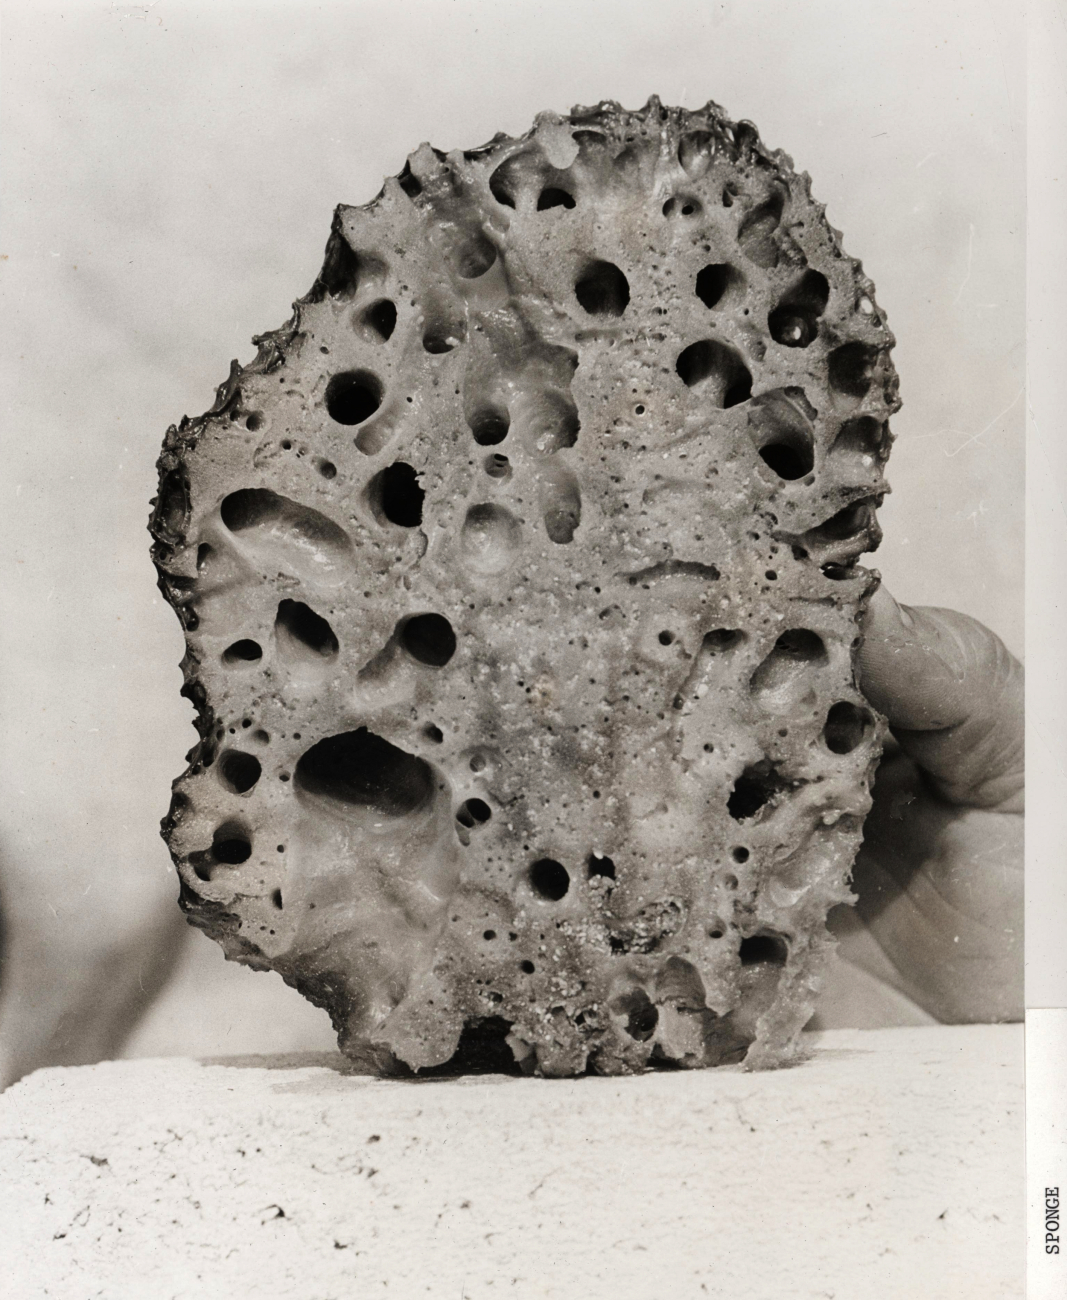 Image from an investigation of Florida commercial sponges